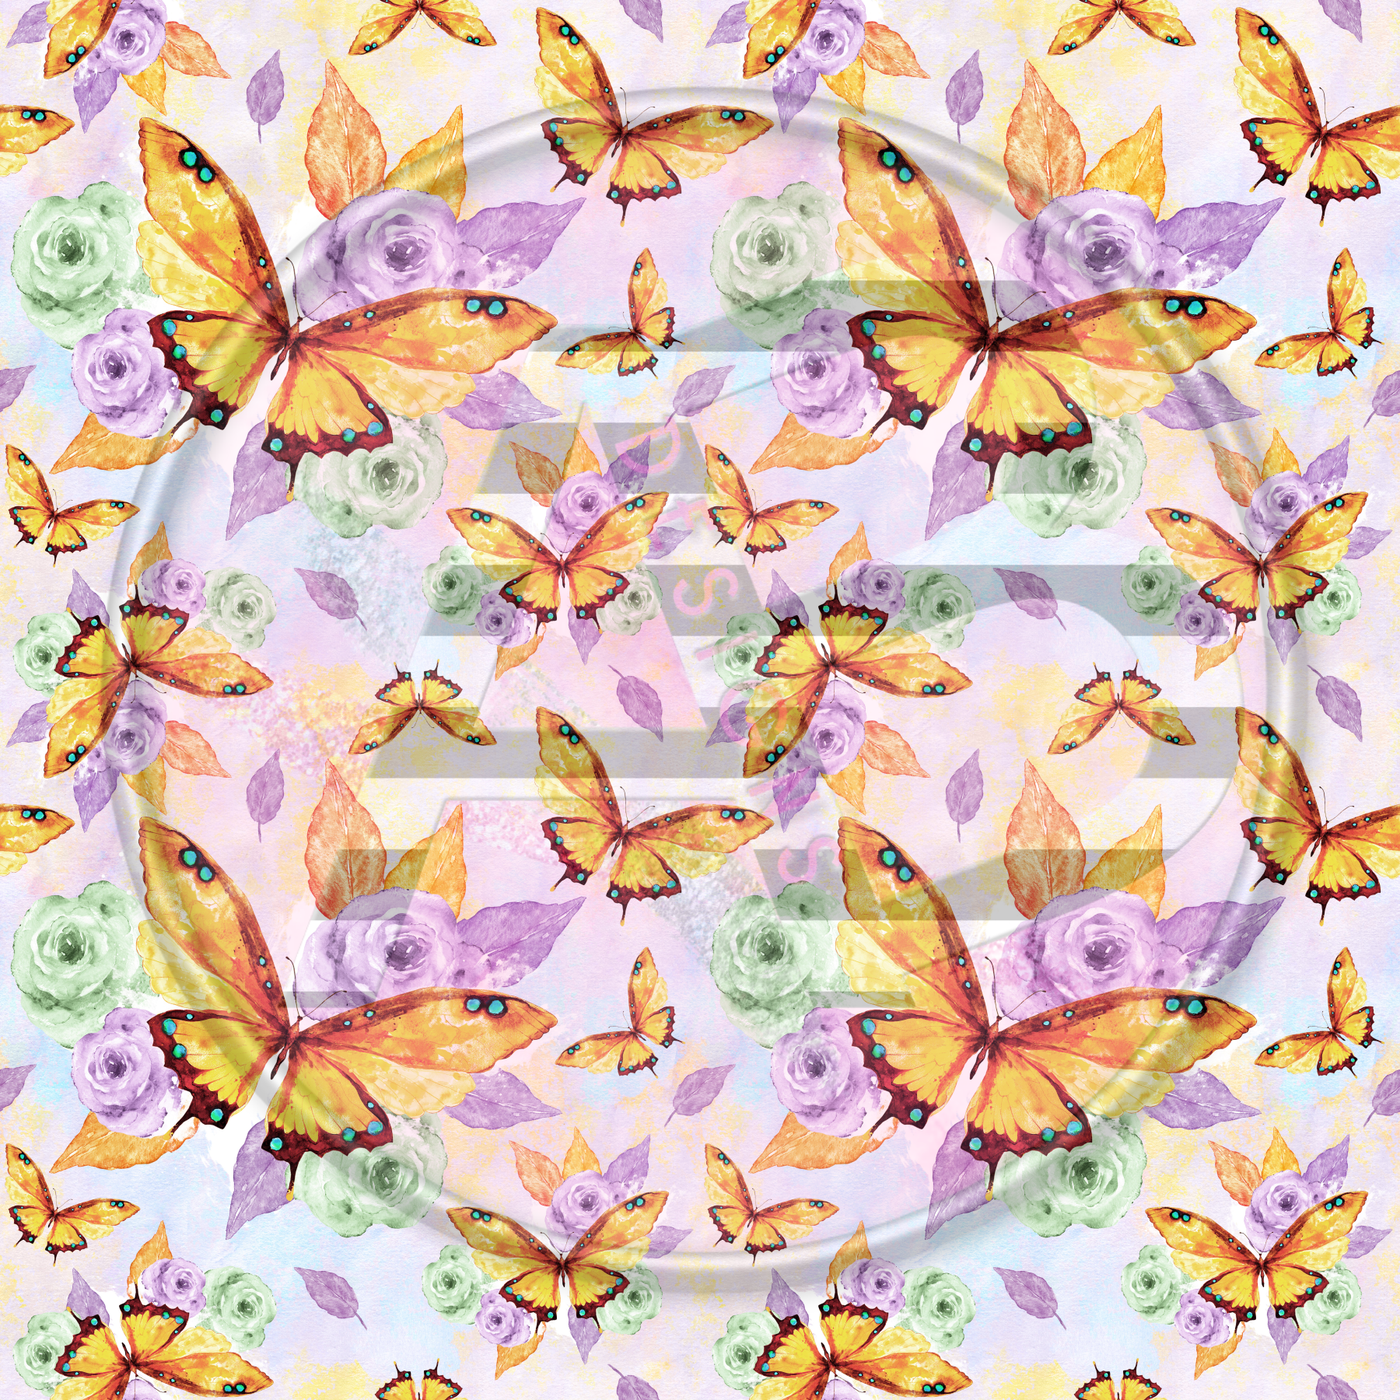 Adhesive Patterned Vinyl - Butterfly 16 Smaller